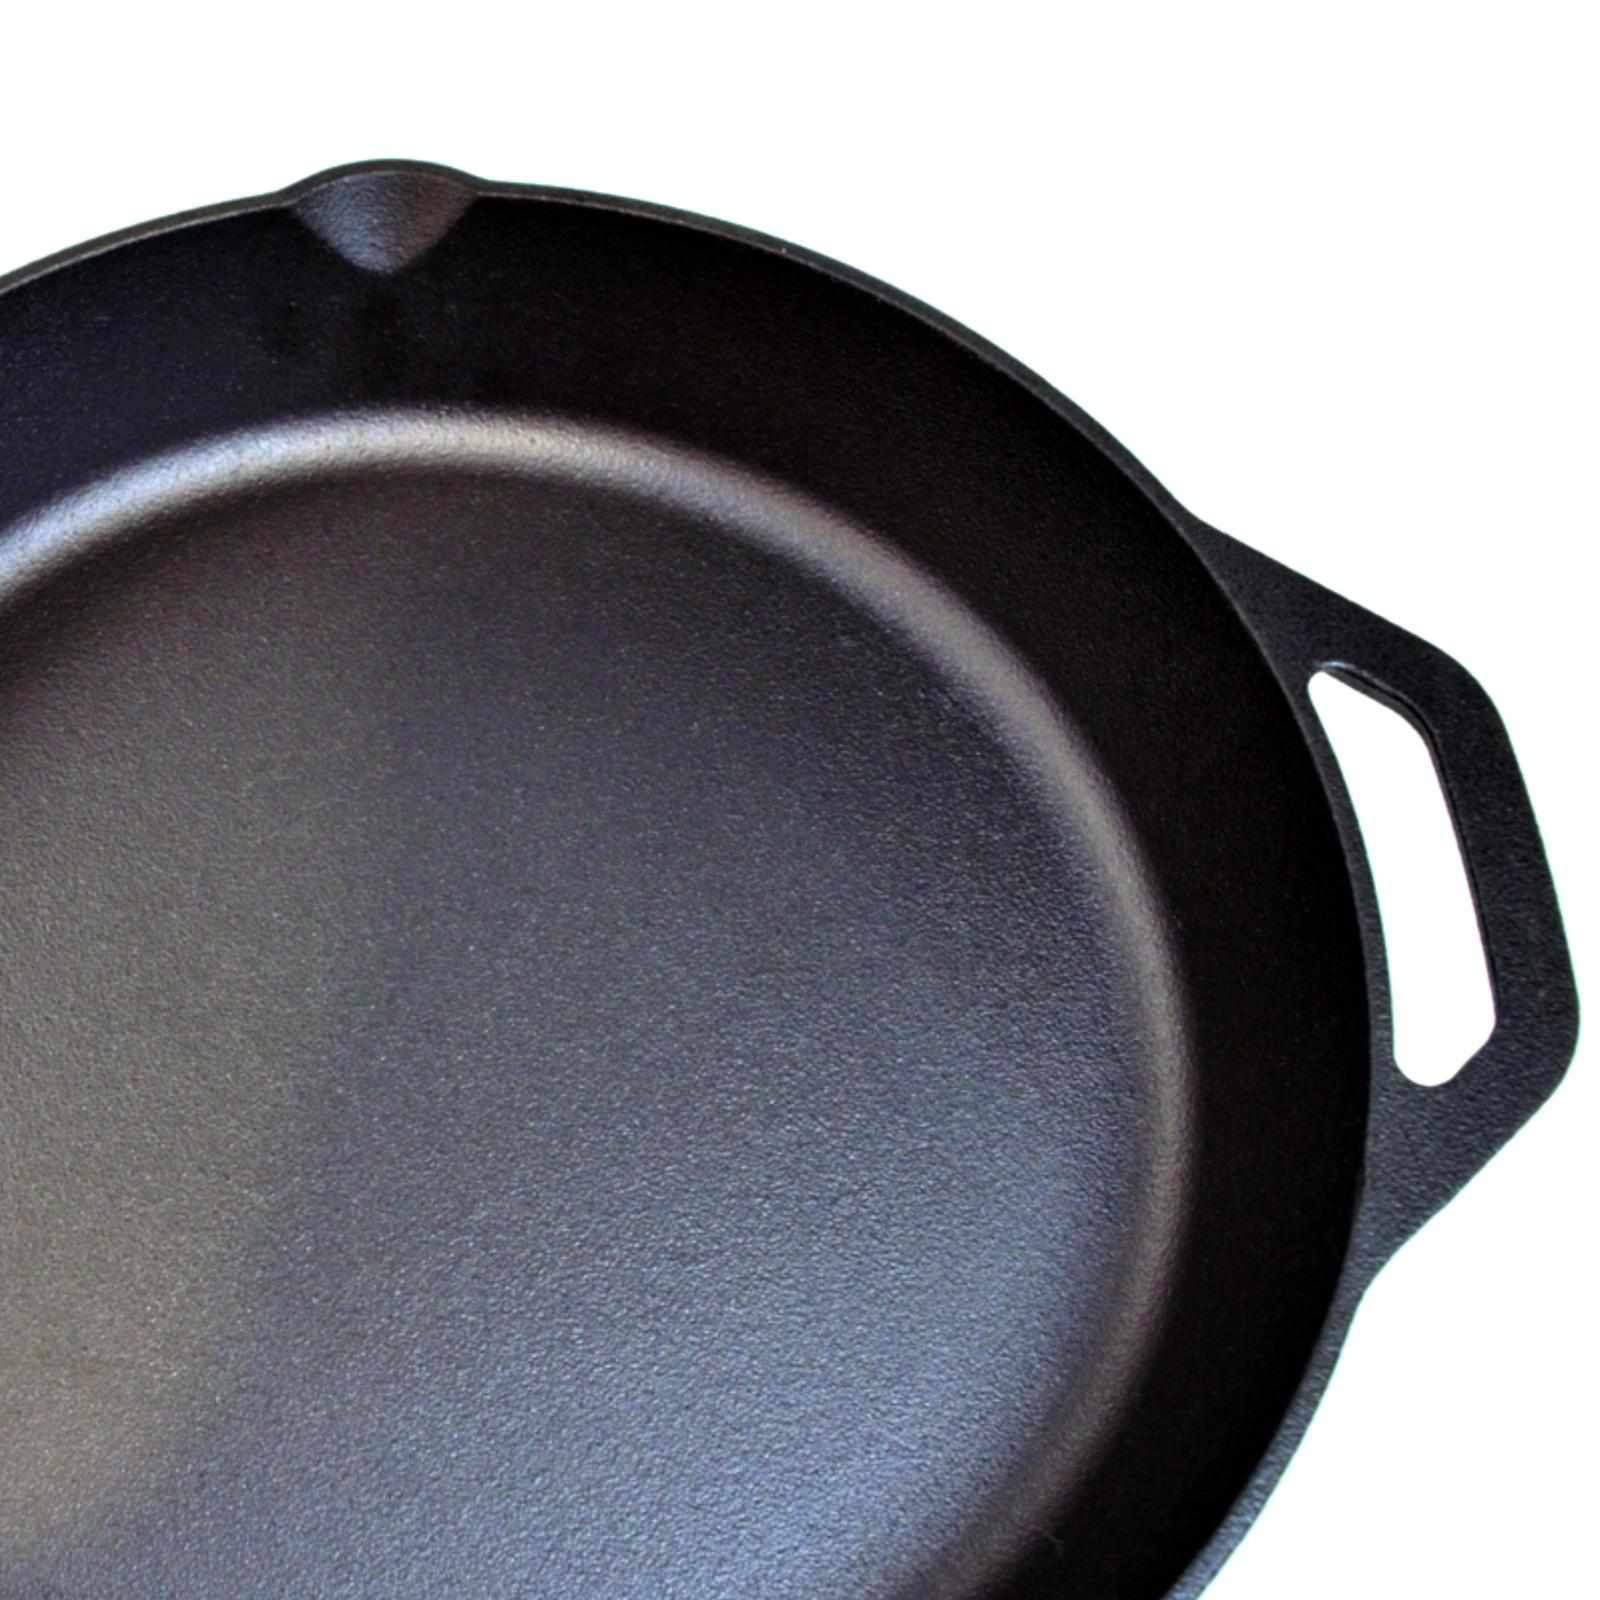 Chef's Quality Skillet Pan 3 Pack - Cast Iron Pan Cookware Set